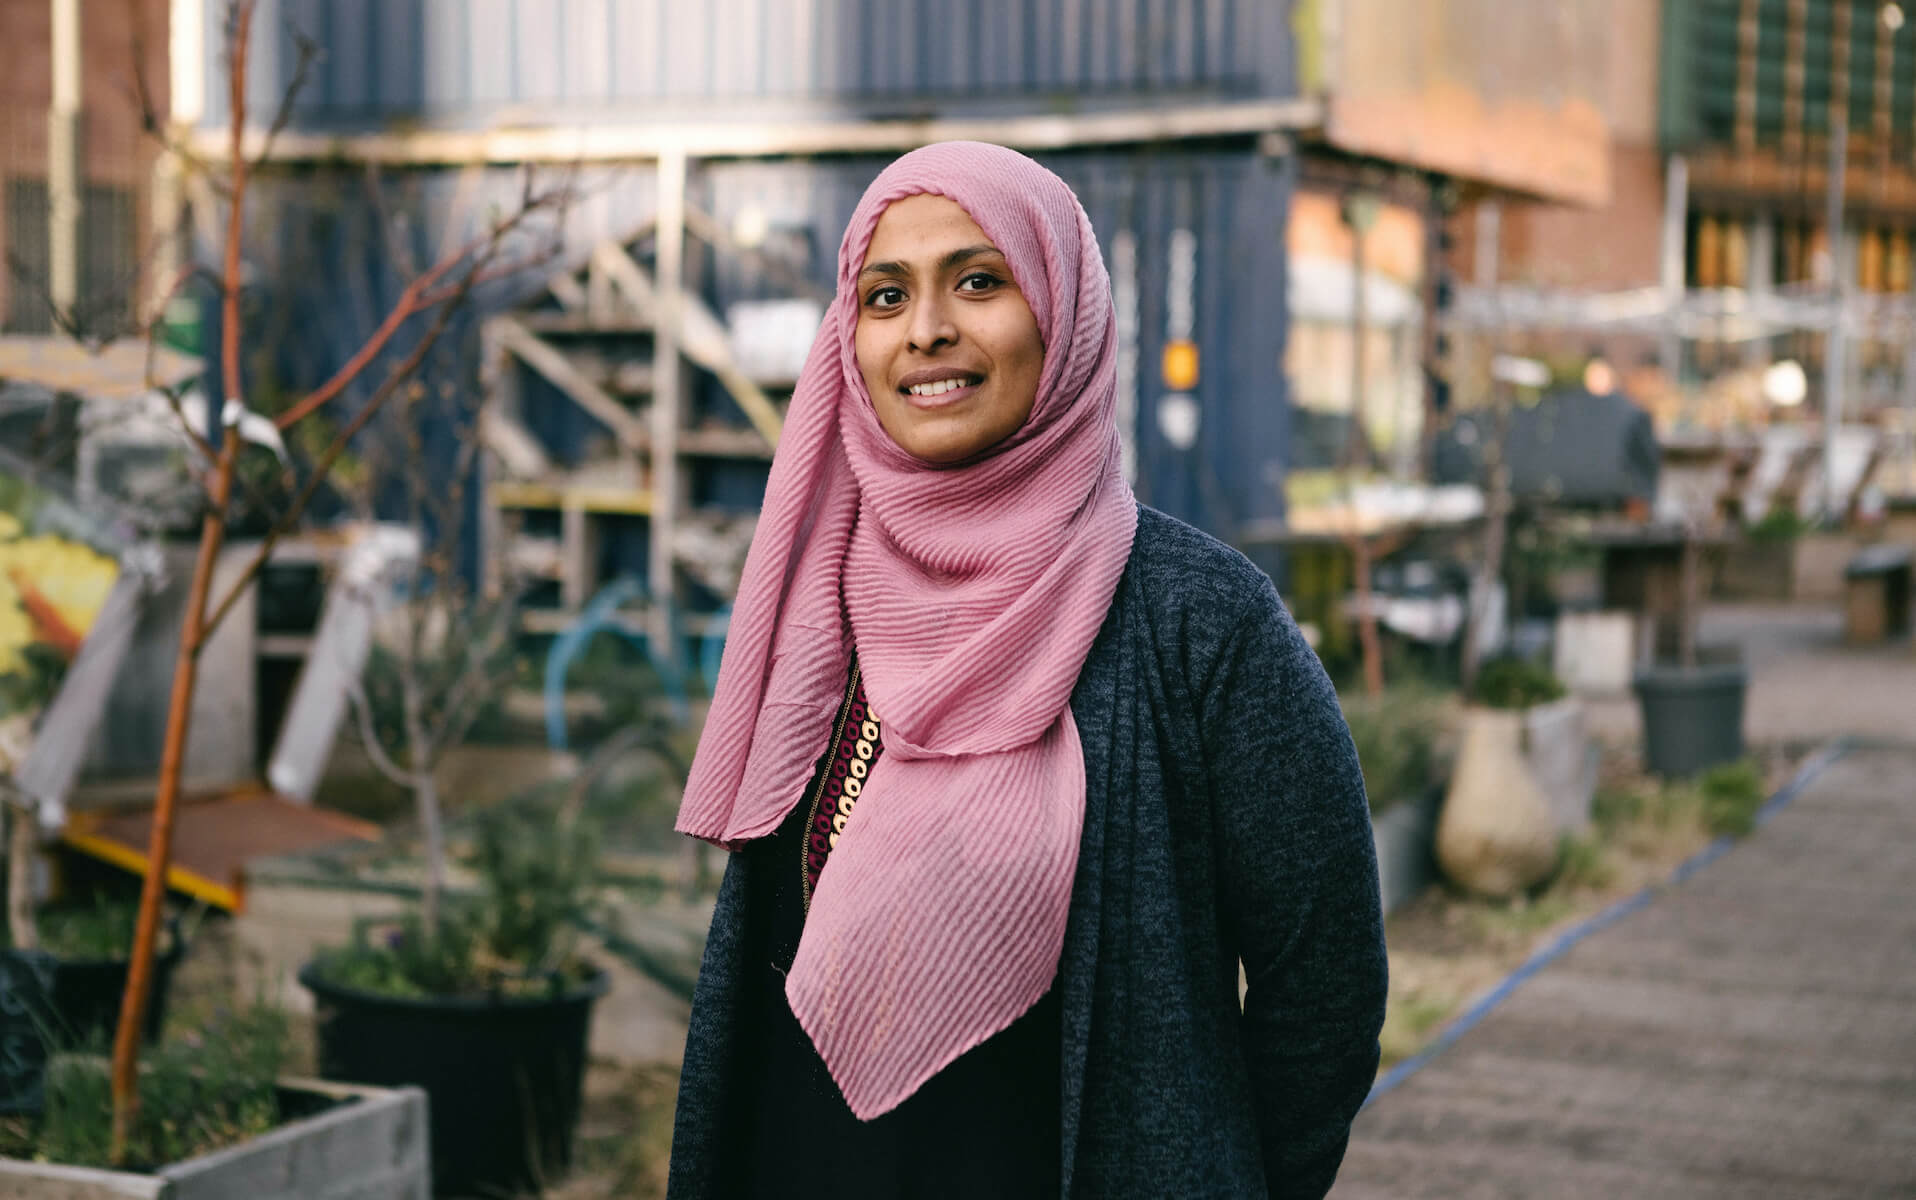 Salina Khatun, the founder of Read and Play